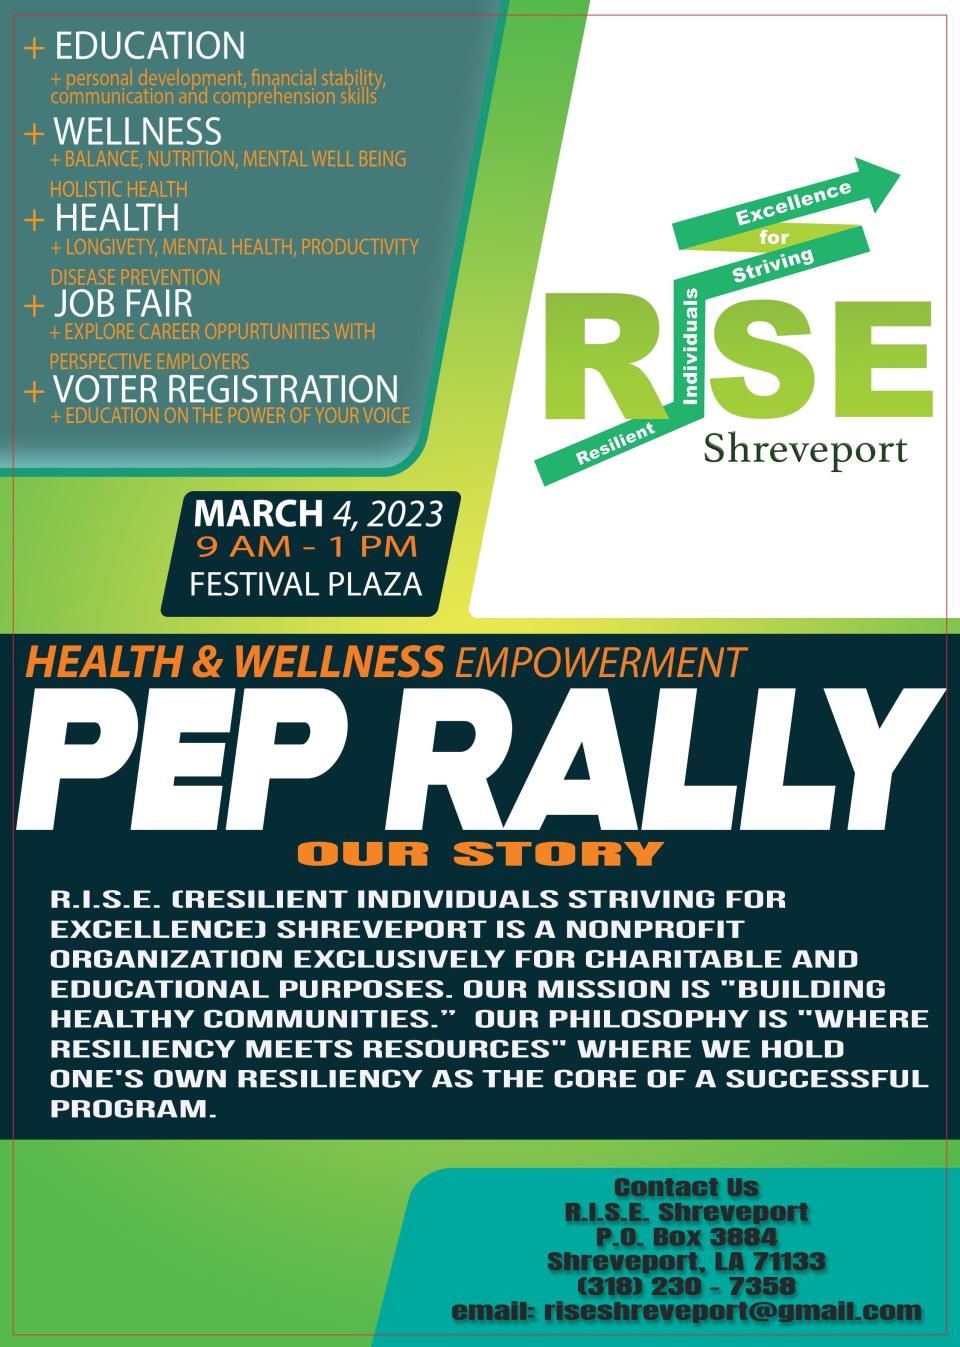 Health care checks, financial information, a job fair, voter registration and more will be available to you at the Health & Wellness Empowerment Pep Rally at Festival Plaza.